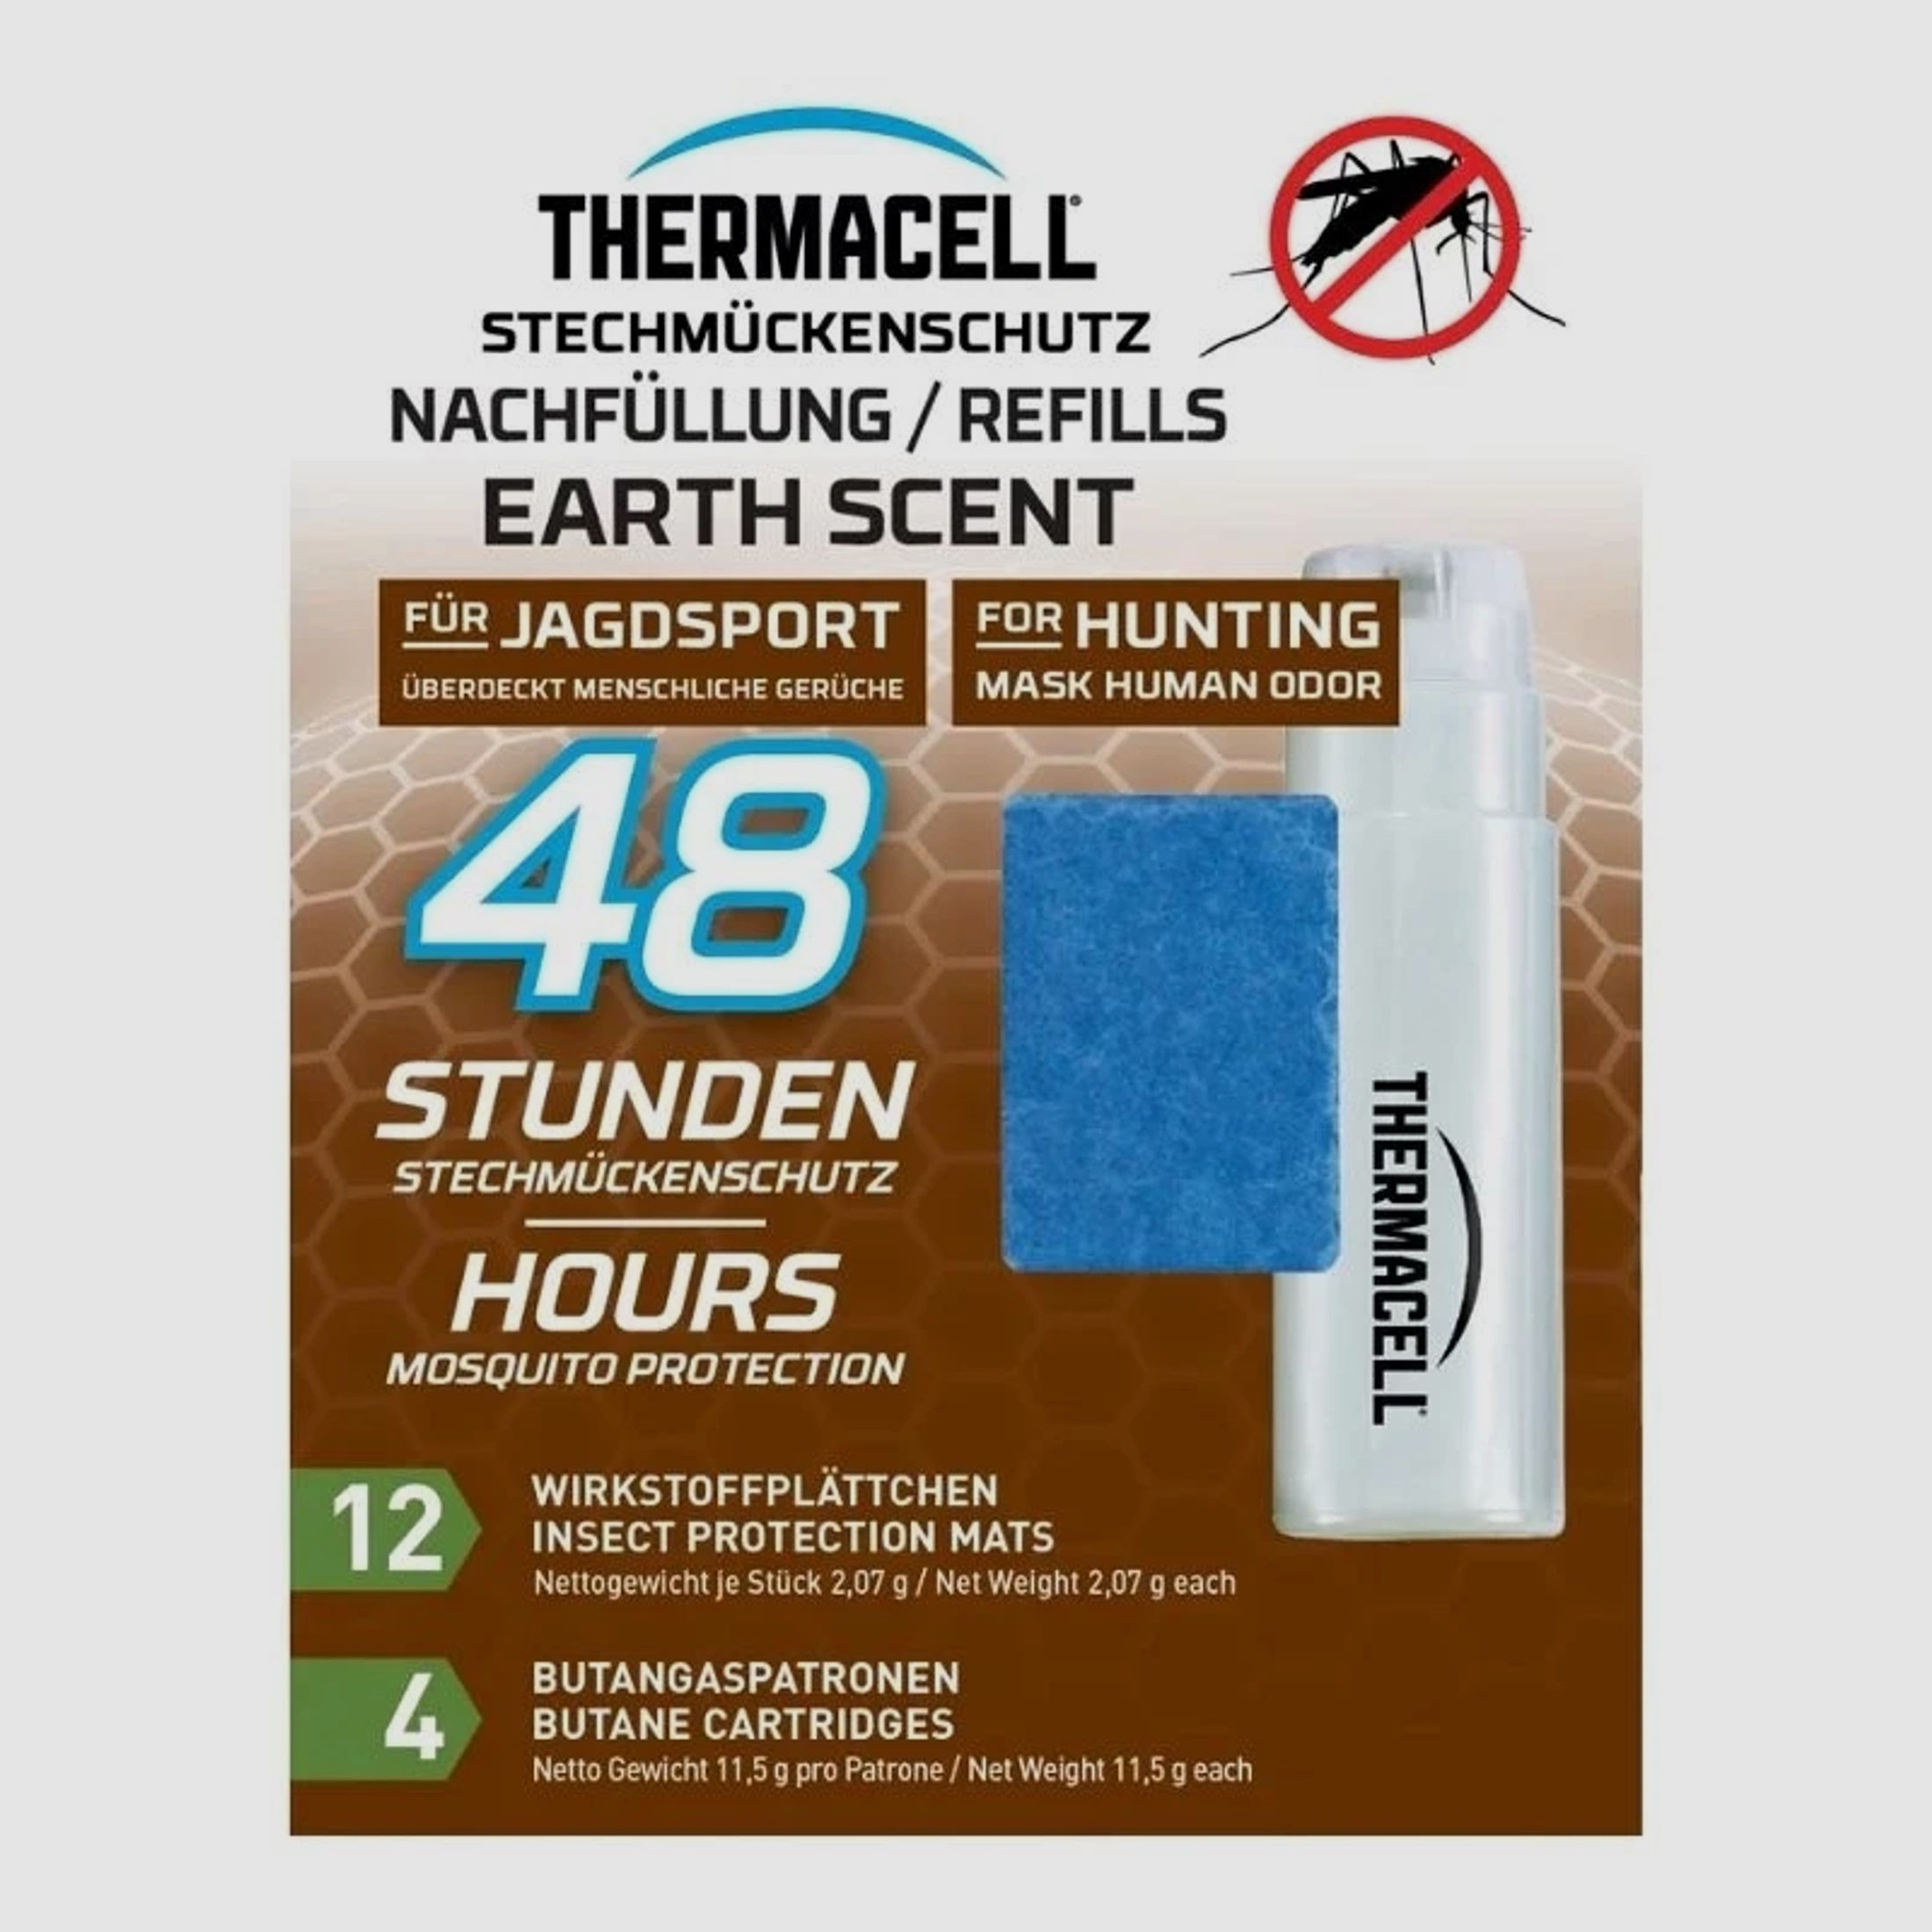 Thermacell E-4 Earth Scent Nachfüllpackung 48 Stunden